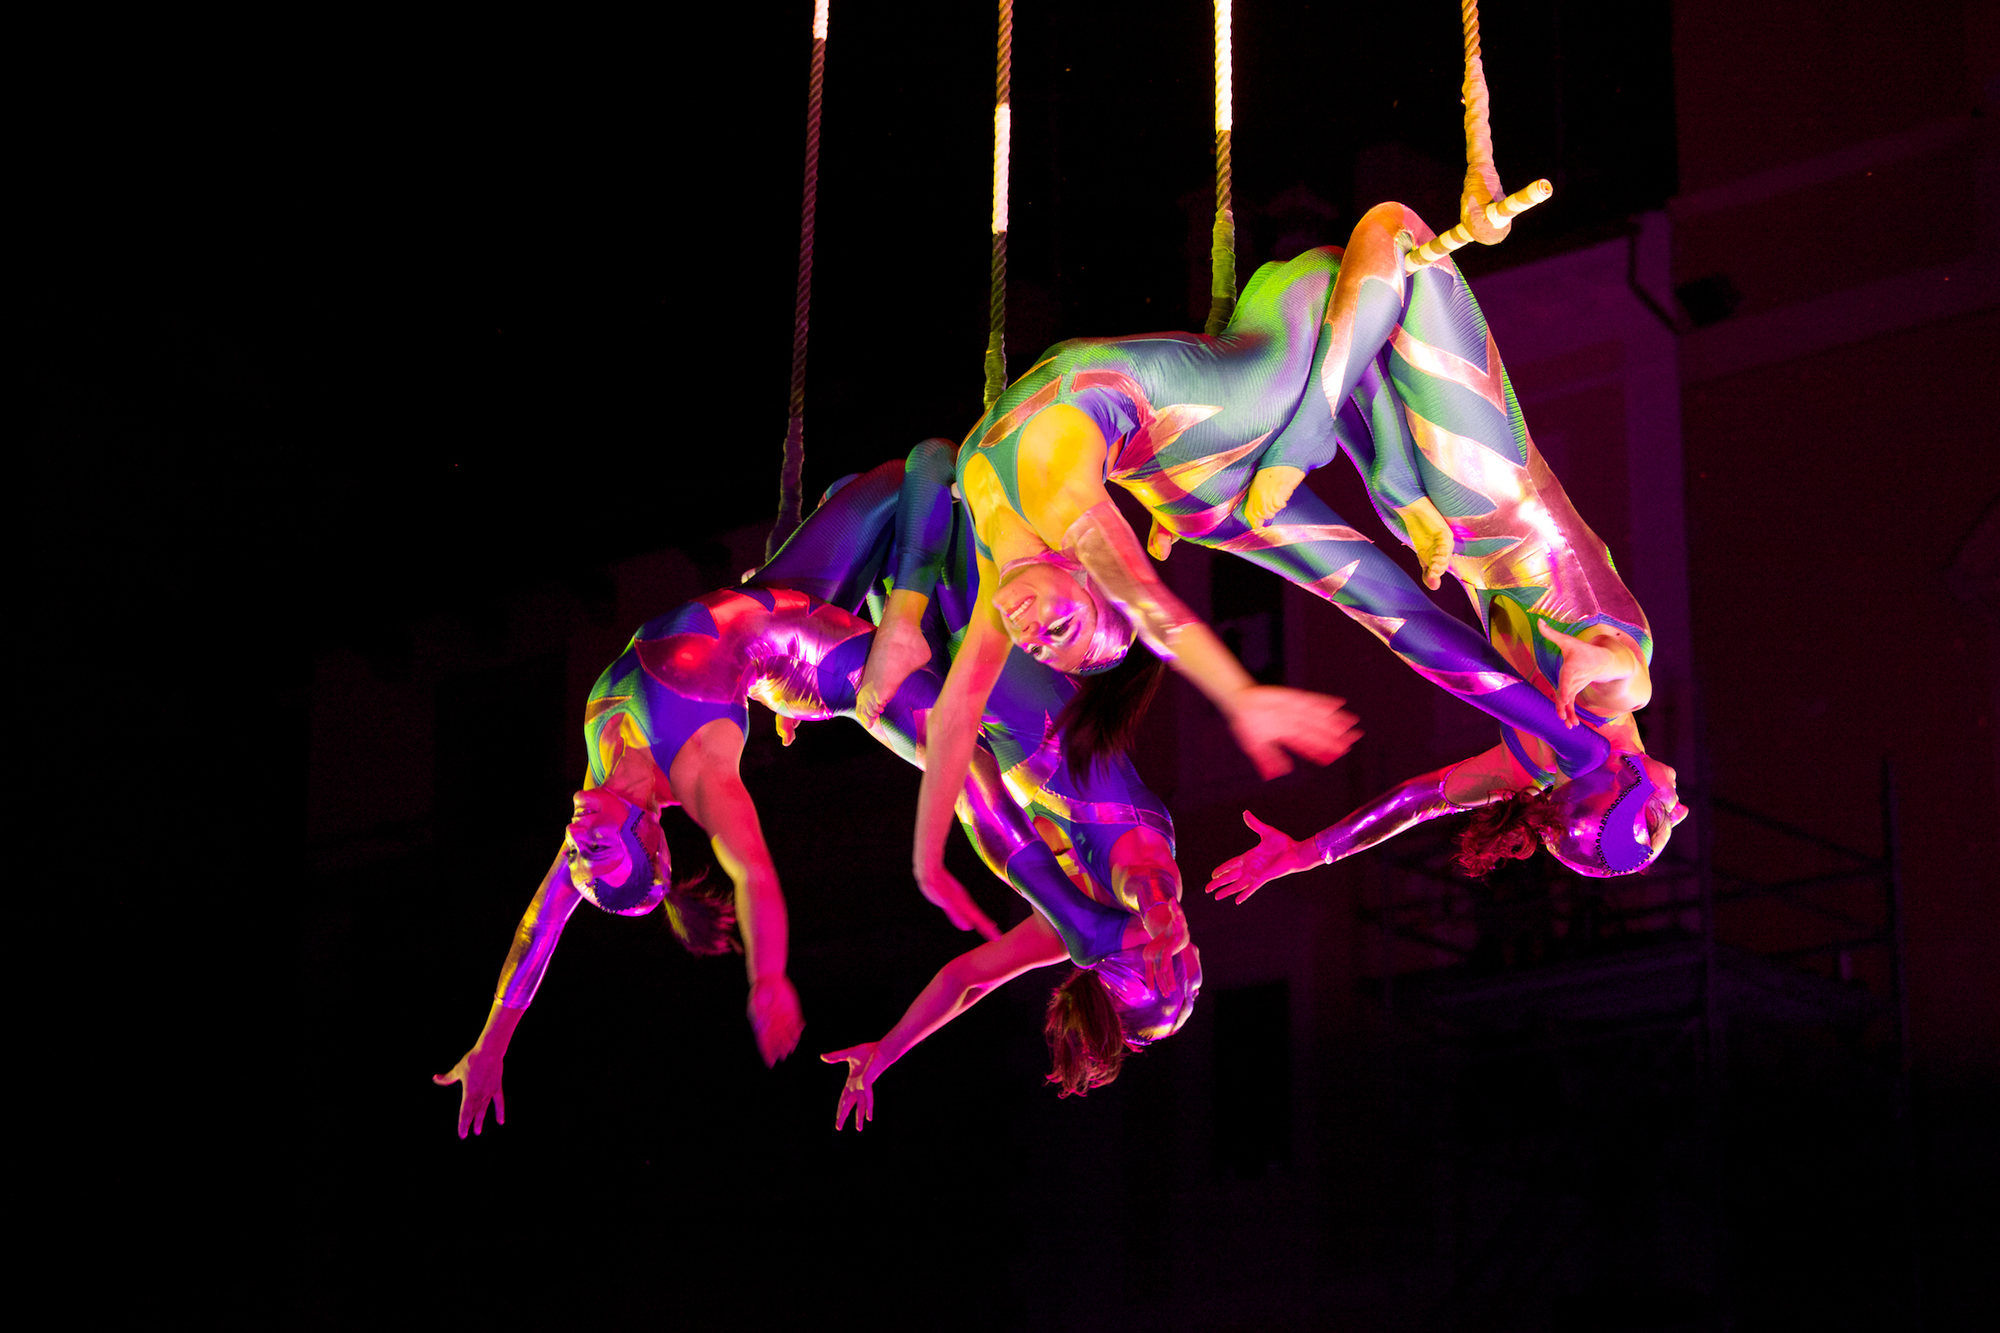 See a Cirque du Soleil Performance in the UK